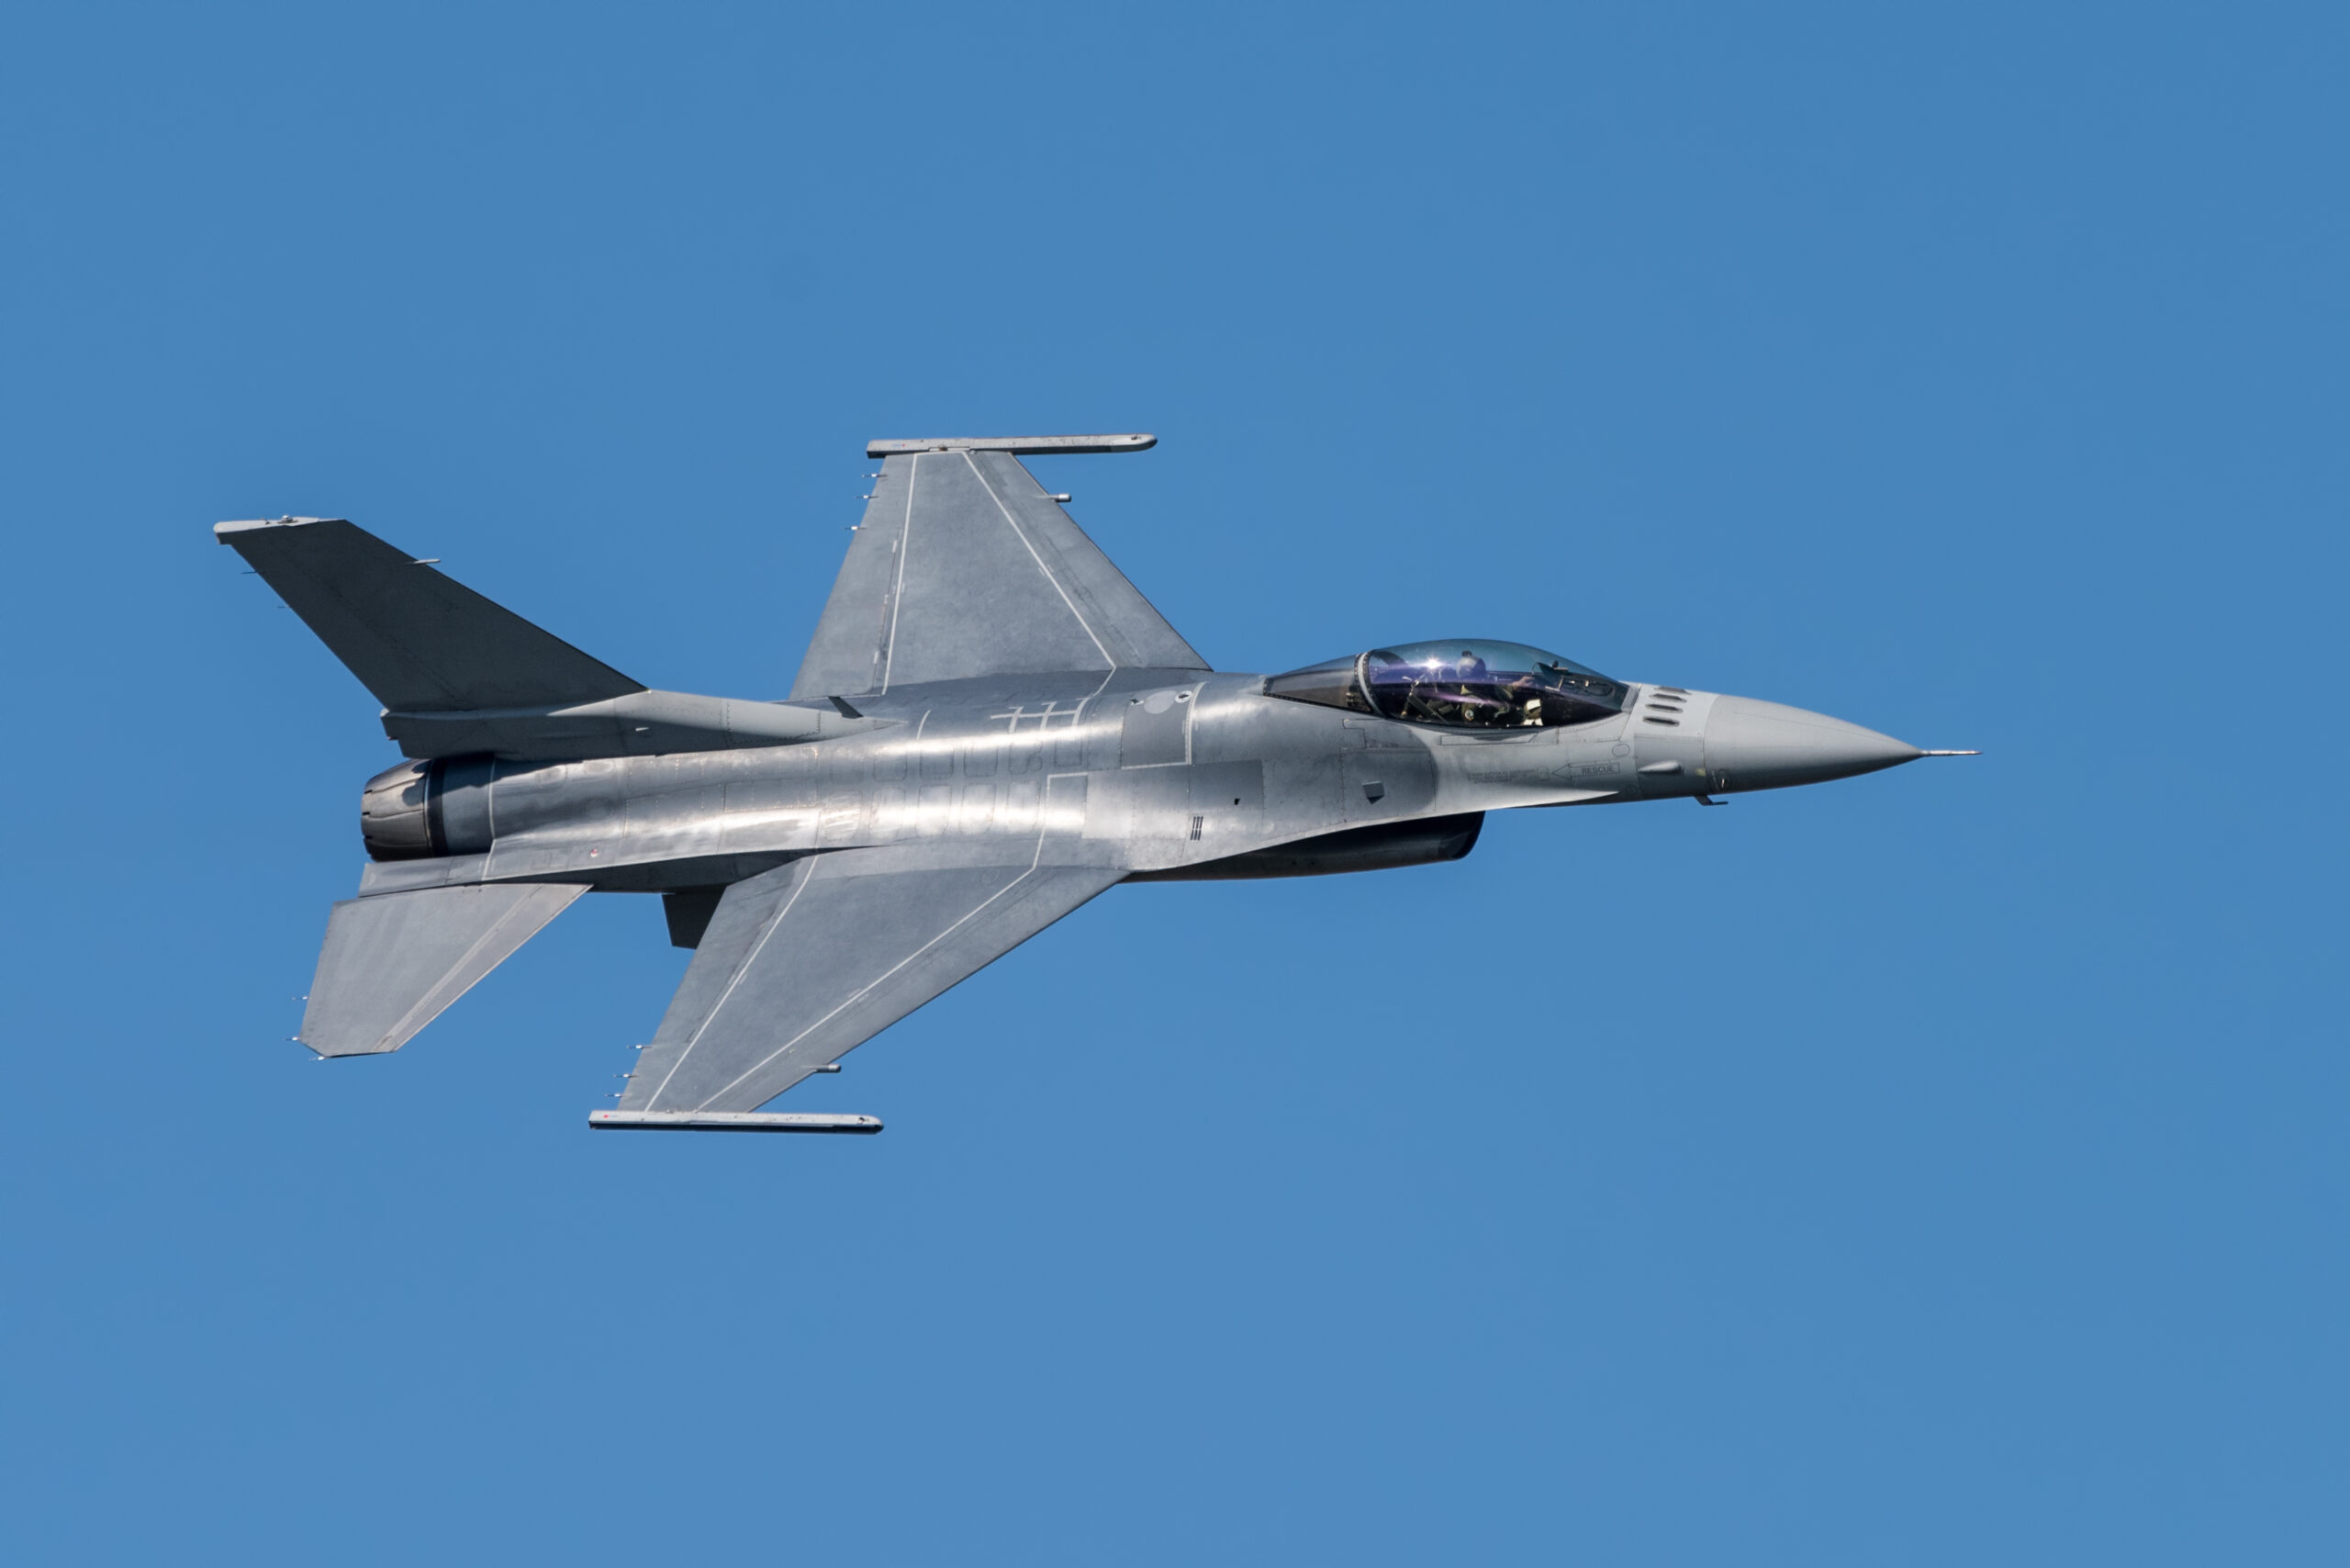 Norway to sell F-16 fighter jets to Romania